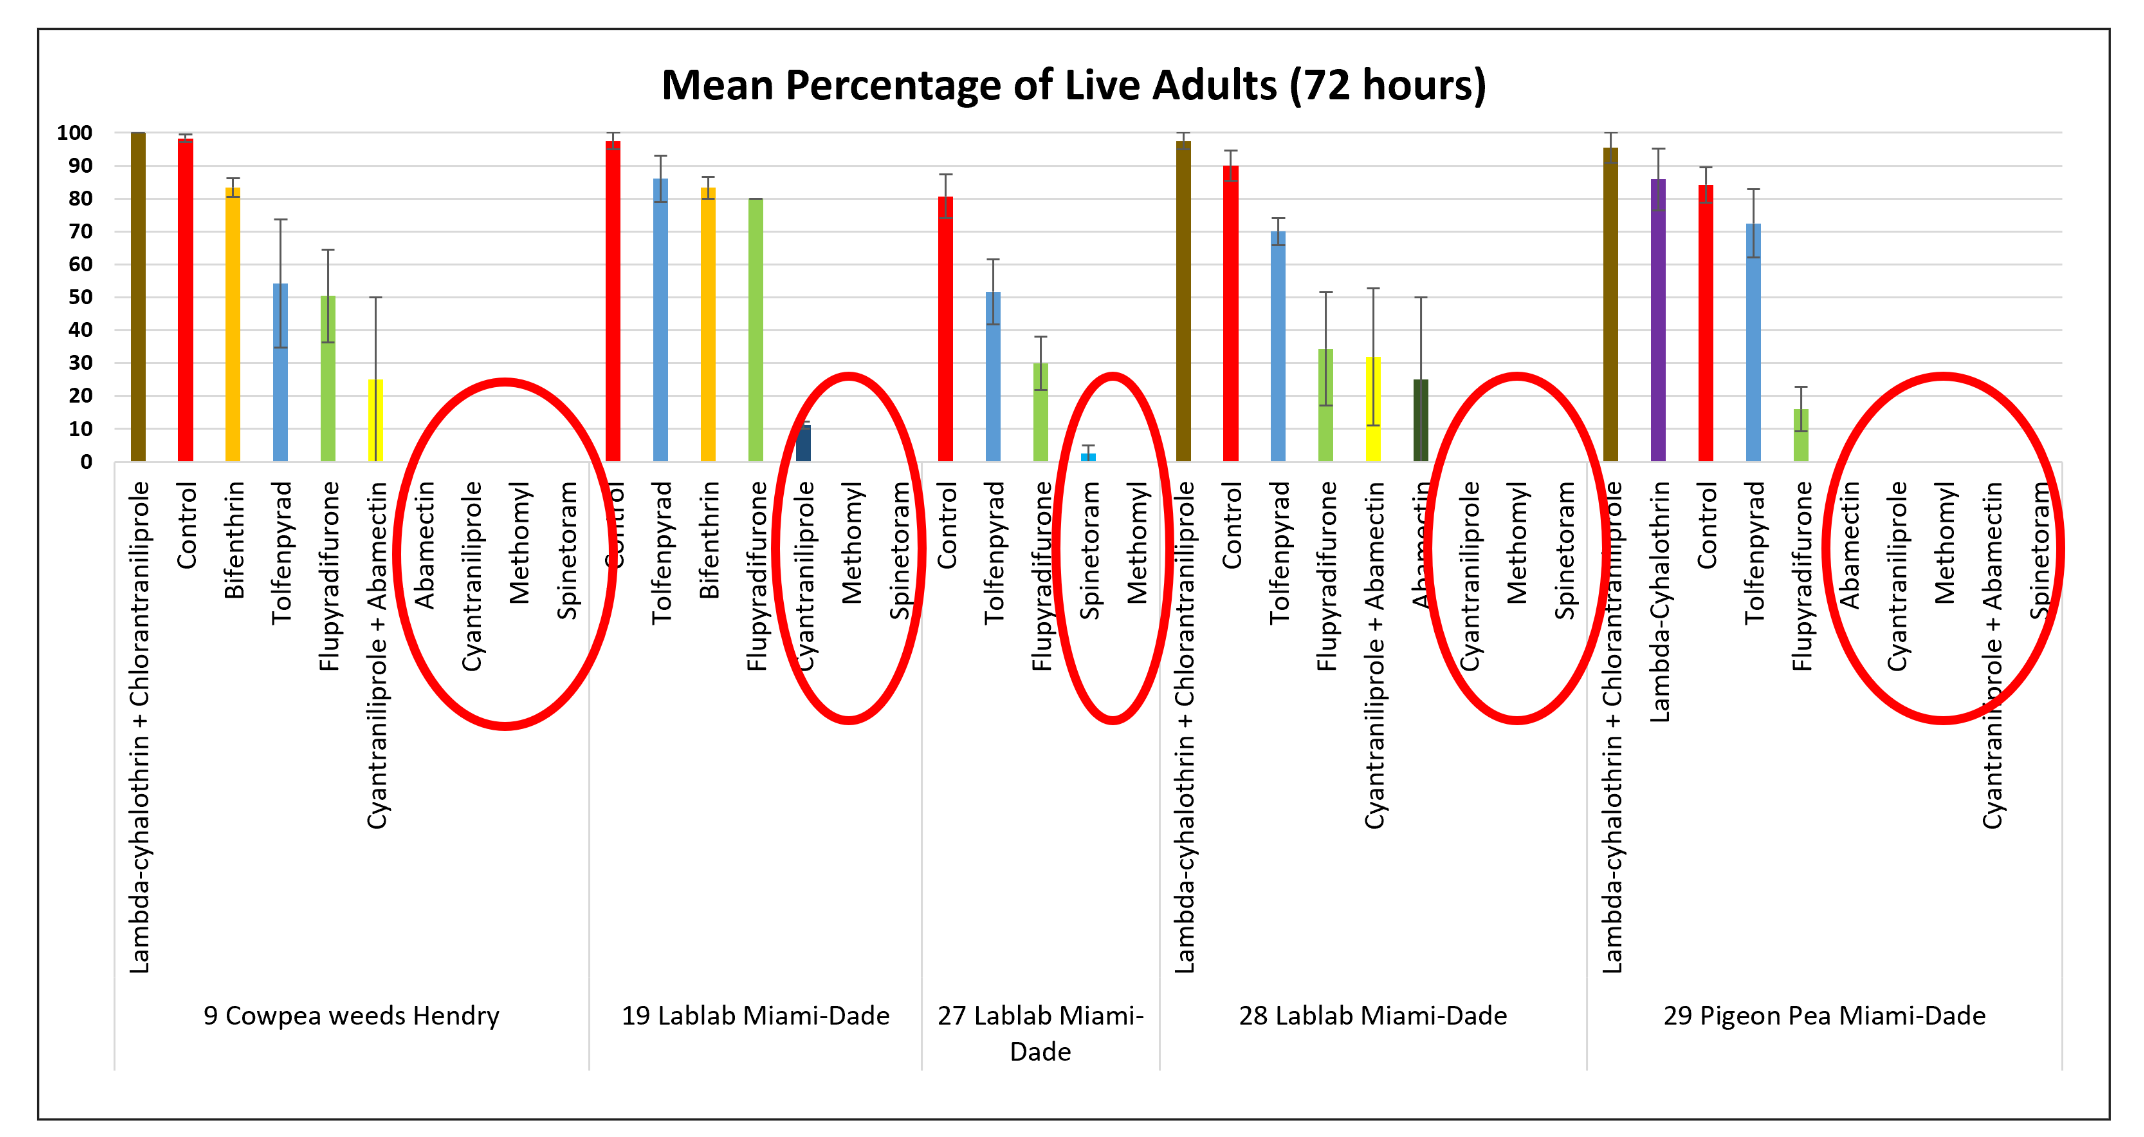 Figure 1: Mean Percentage of Live Adults (72 hours)